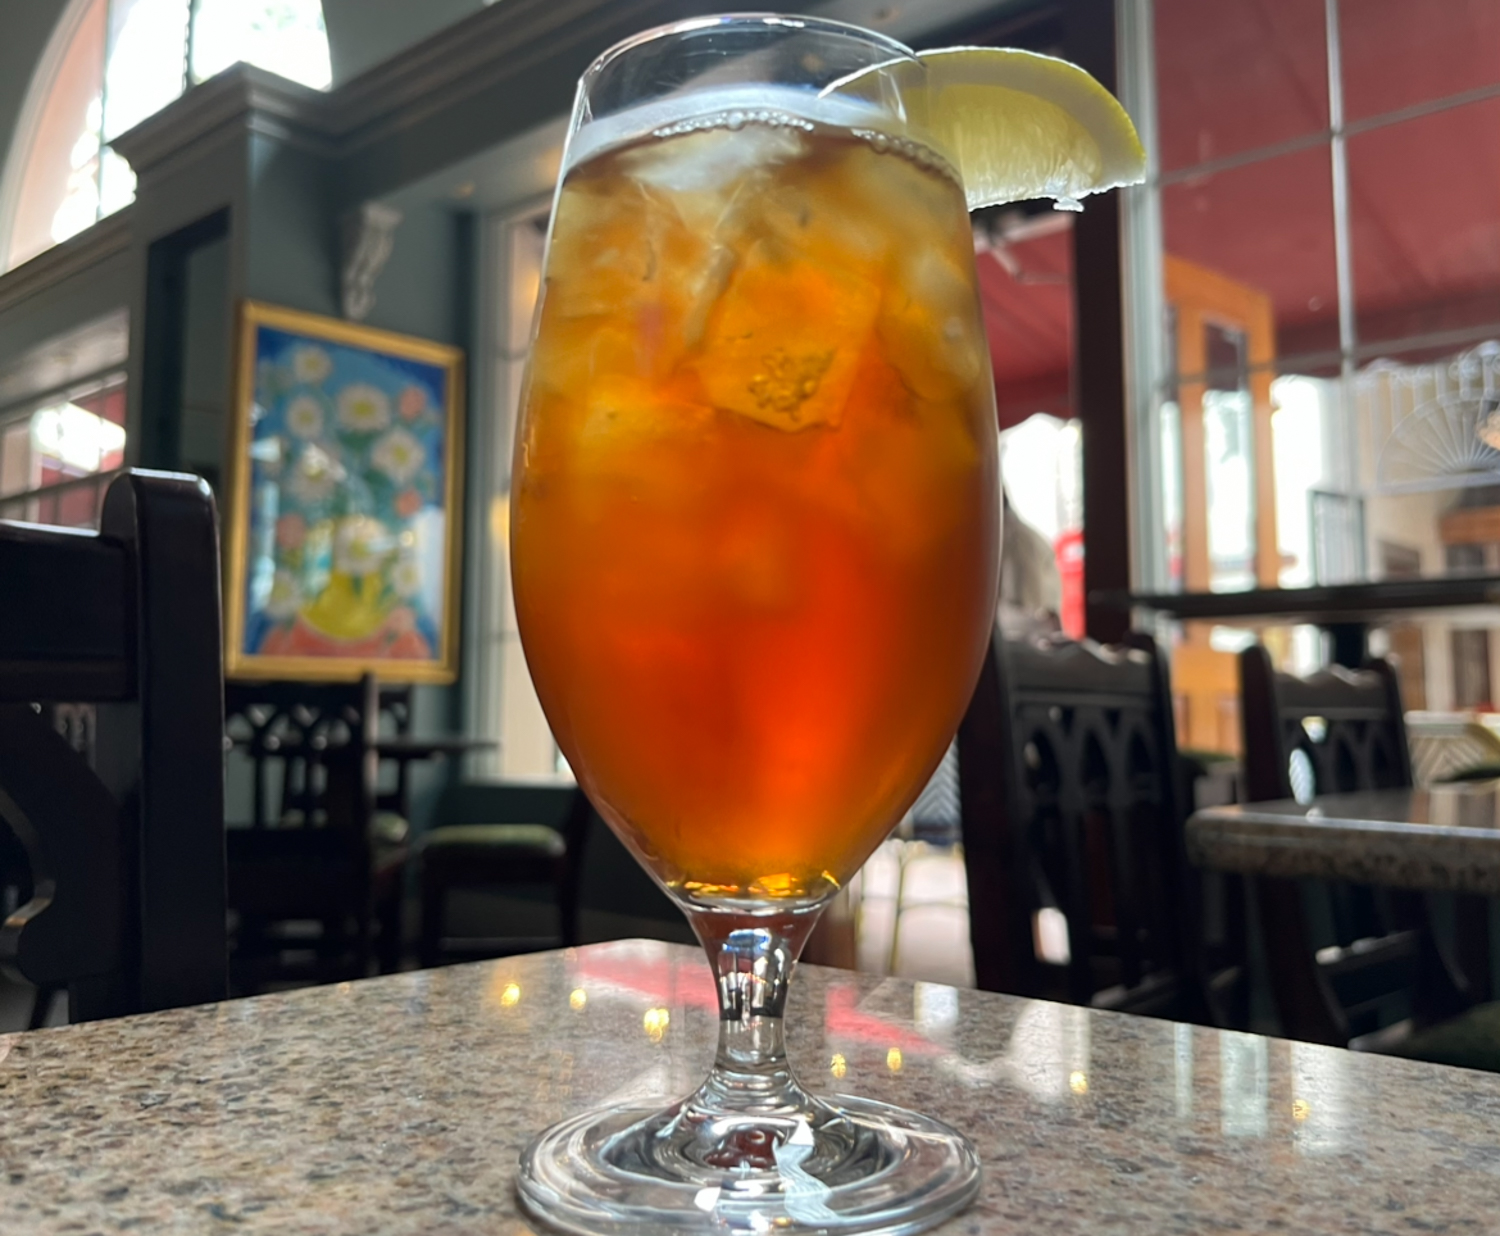 An iced tea creates drops of condensation around its glass at Petit Valentein on Tuesday, May 9 in Santa Barbara, Calif. The tea is made in-house and comes served with a slice of lemon.